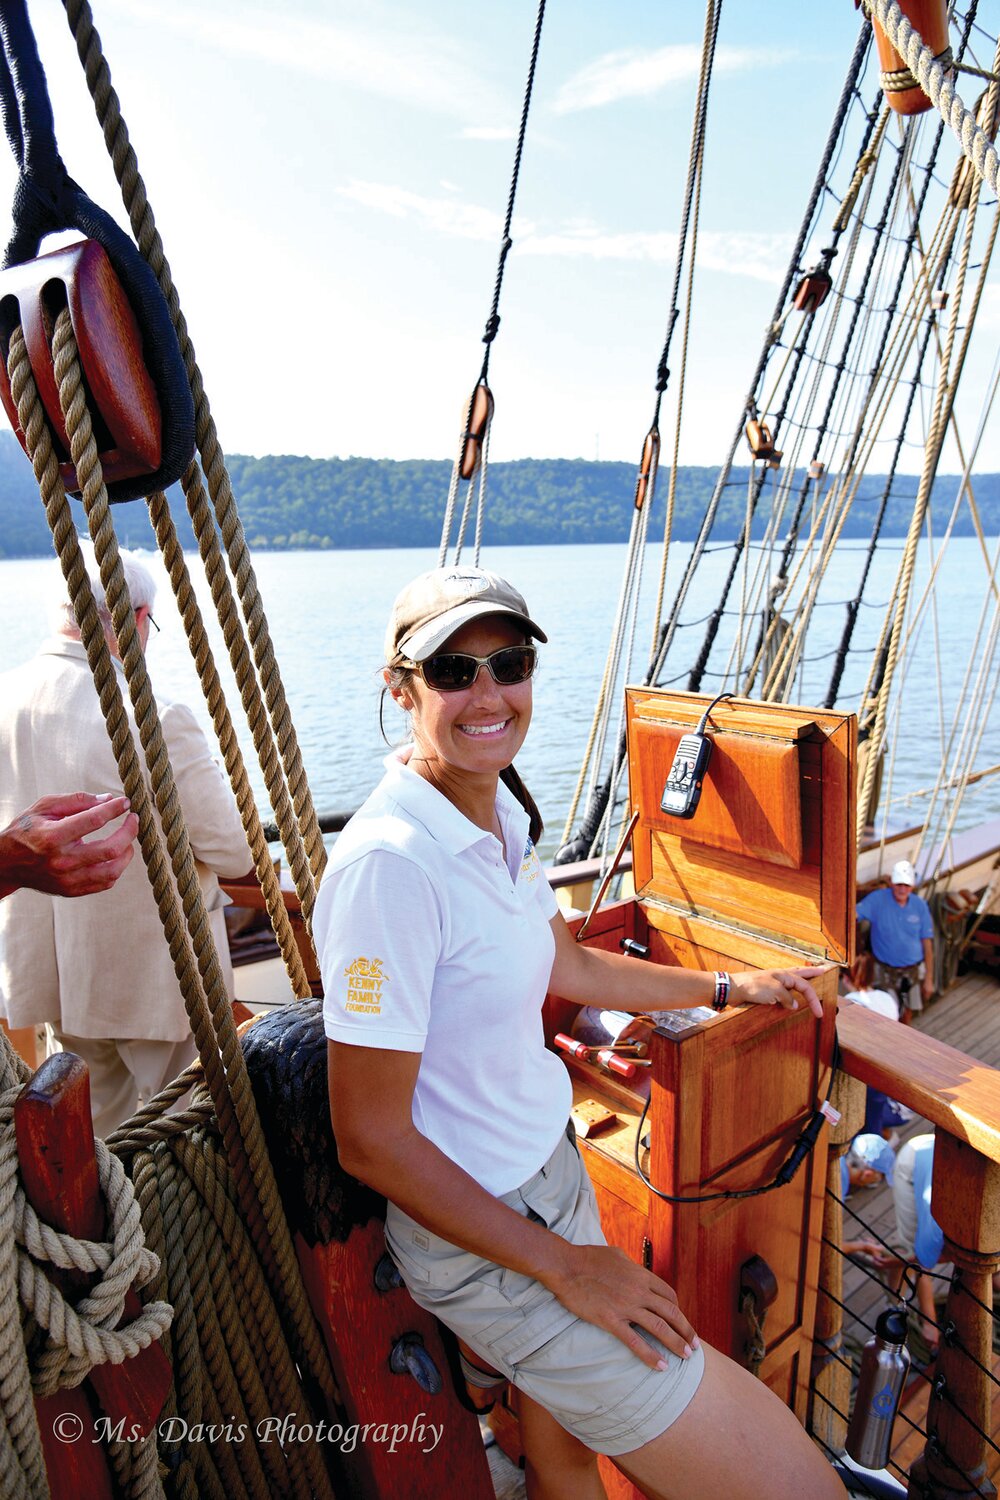 Capt. Lauren Morgens stands aboard the Kalmar Nyckel, the Tall Ship of Delaware.